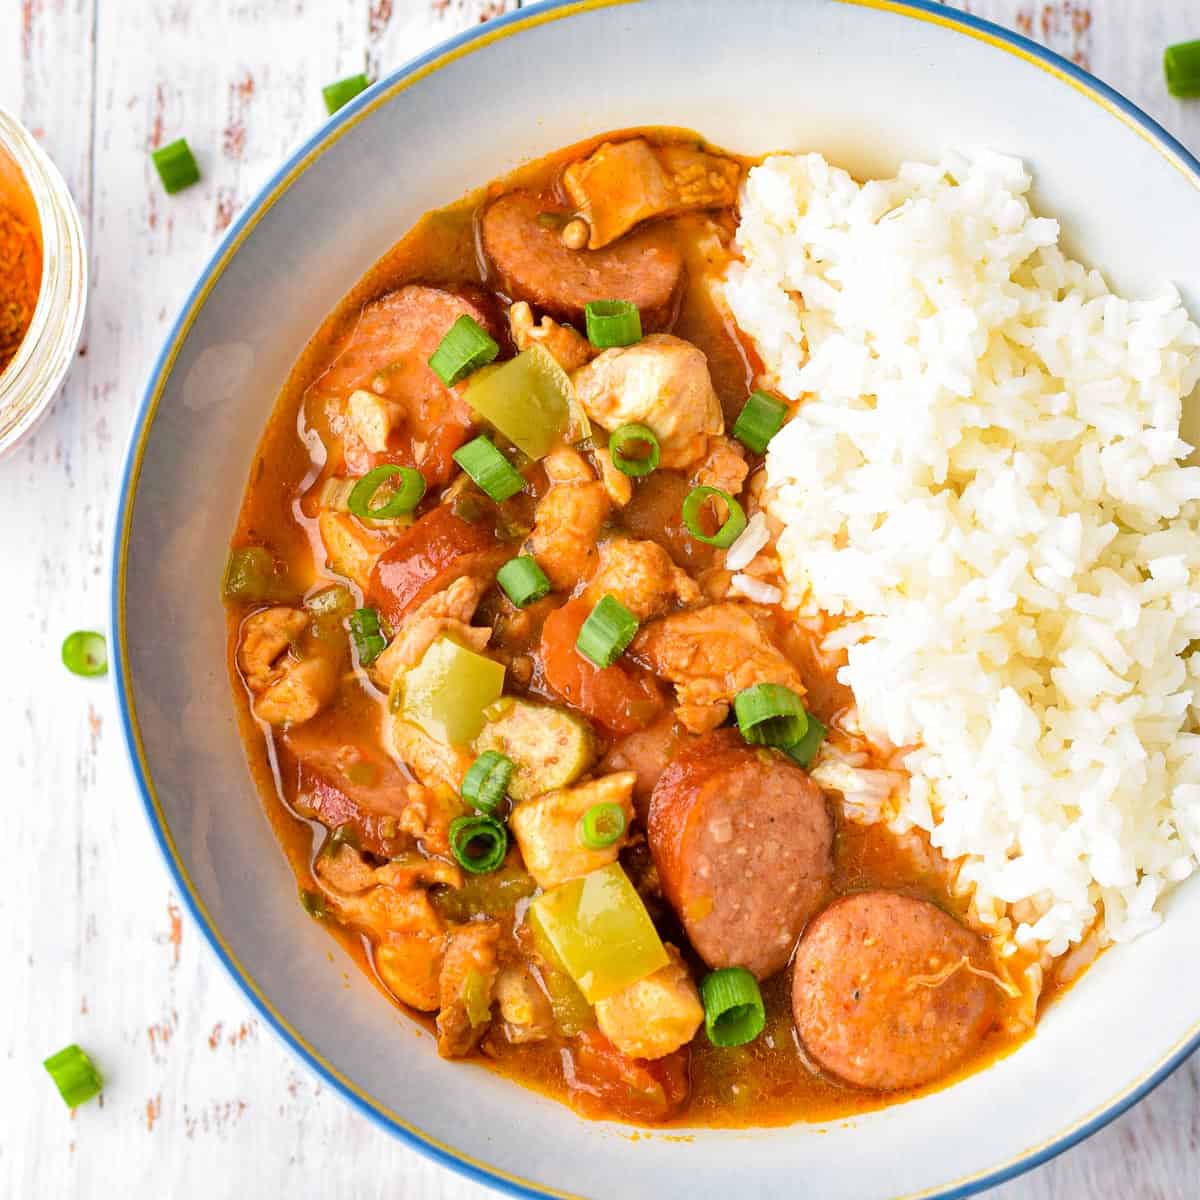 a bowl of gumbo with chicken, sausage, and white rice